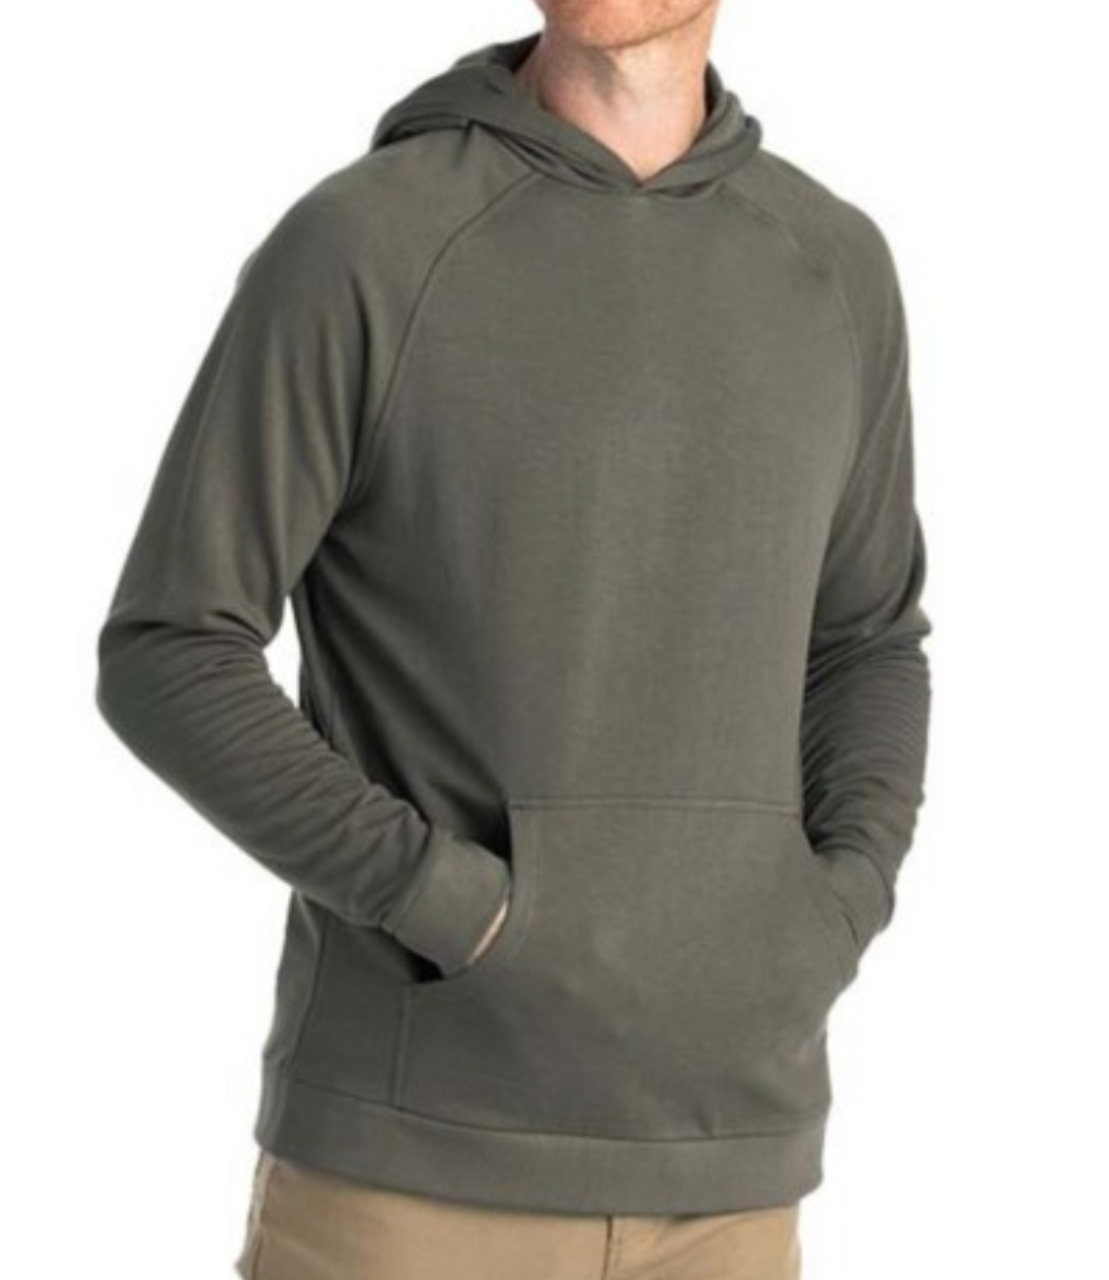 Wyoming Fly Fishing Free Fly Men's Bamboo Lightweight Fleece Hoody Embroidered Fatigue - 3XL, Fatigue